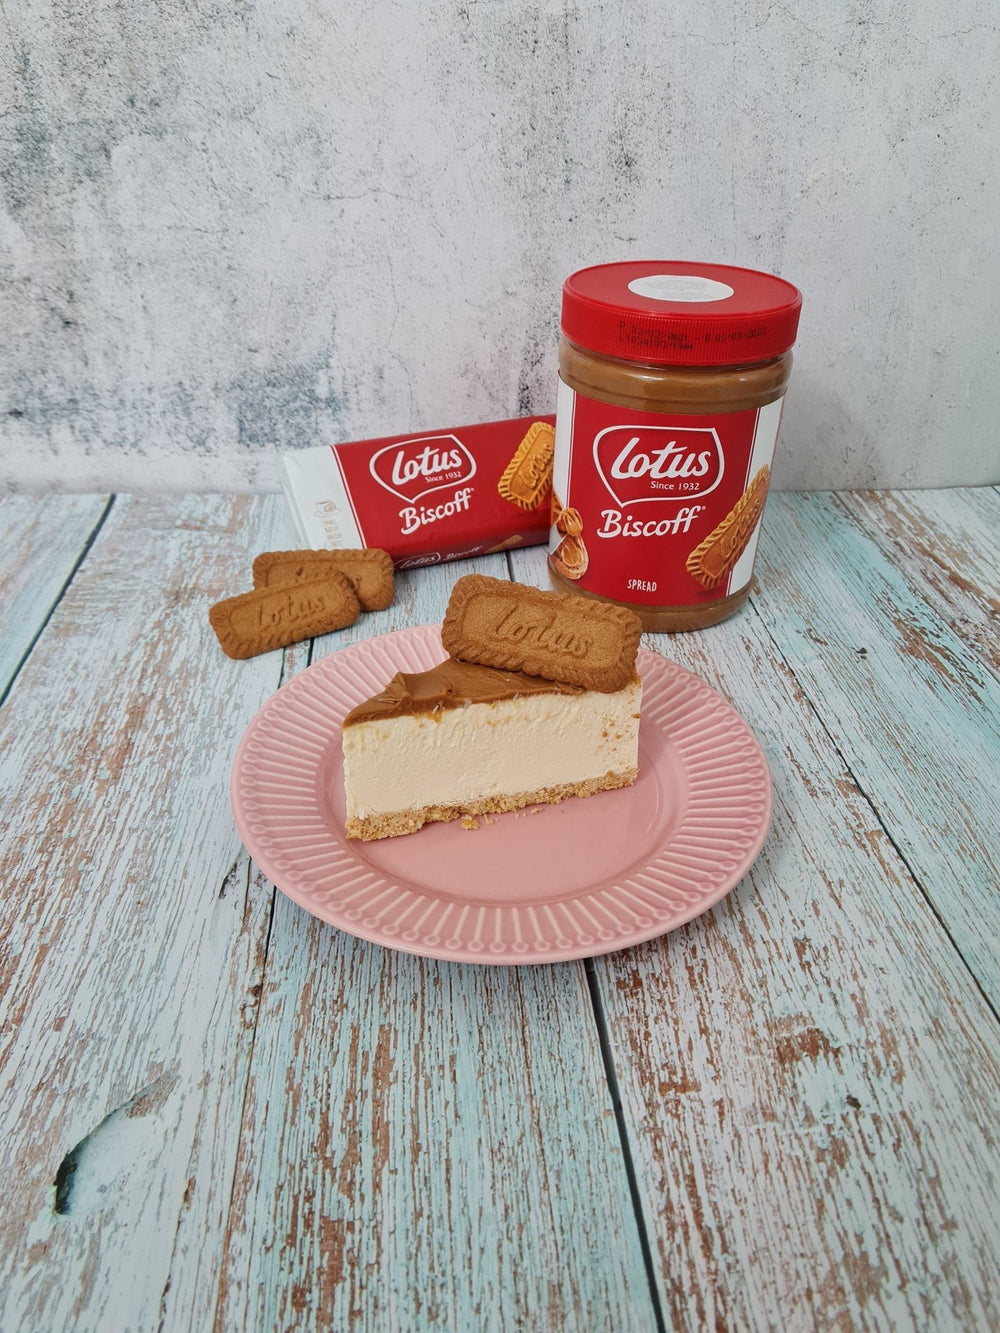 Eggless Lotus Biscoff Cheese 1pc SLICE CAKE (Available Daily) - SK Homemade Cakes---